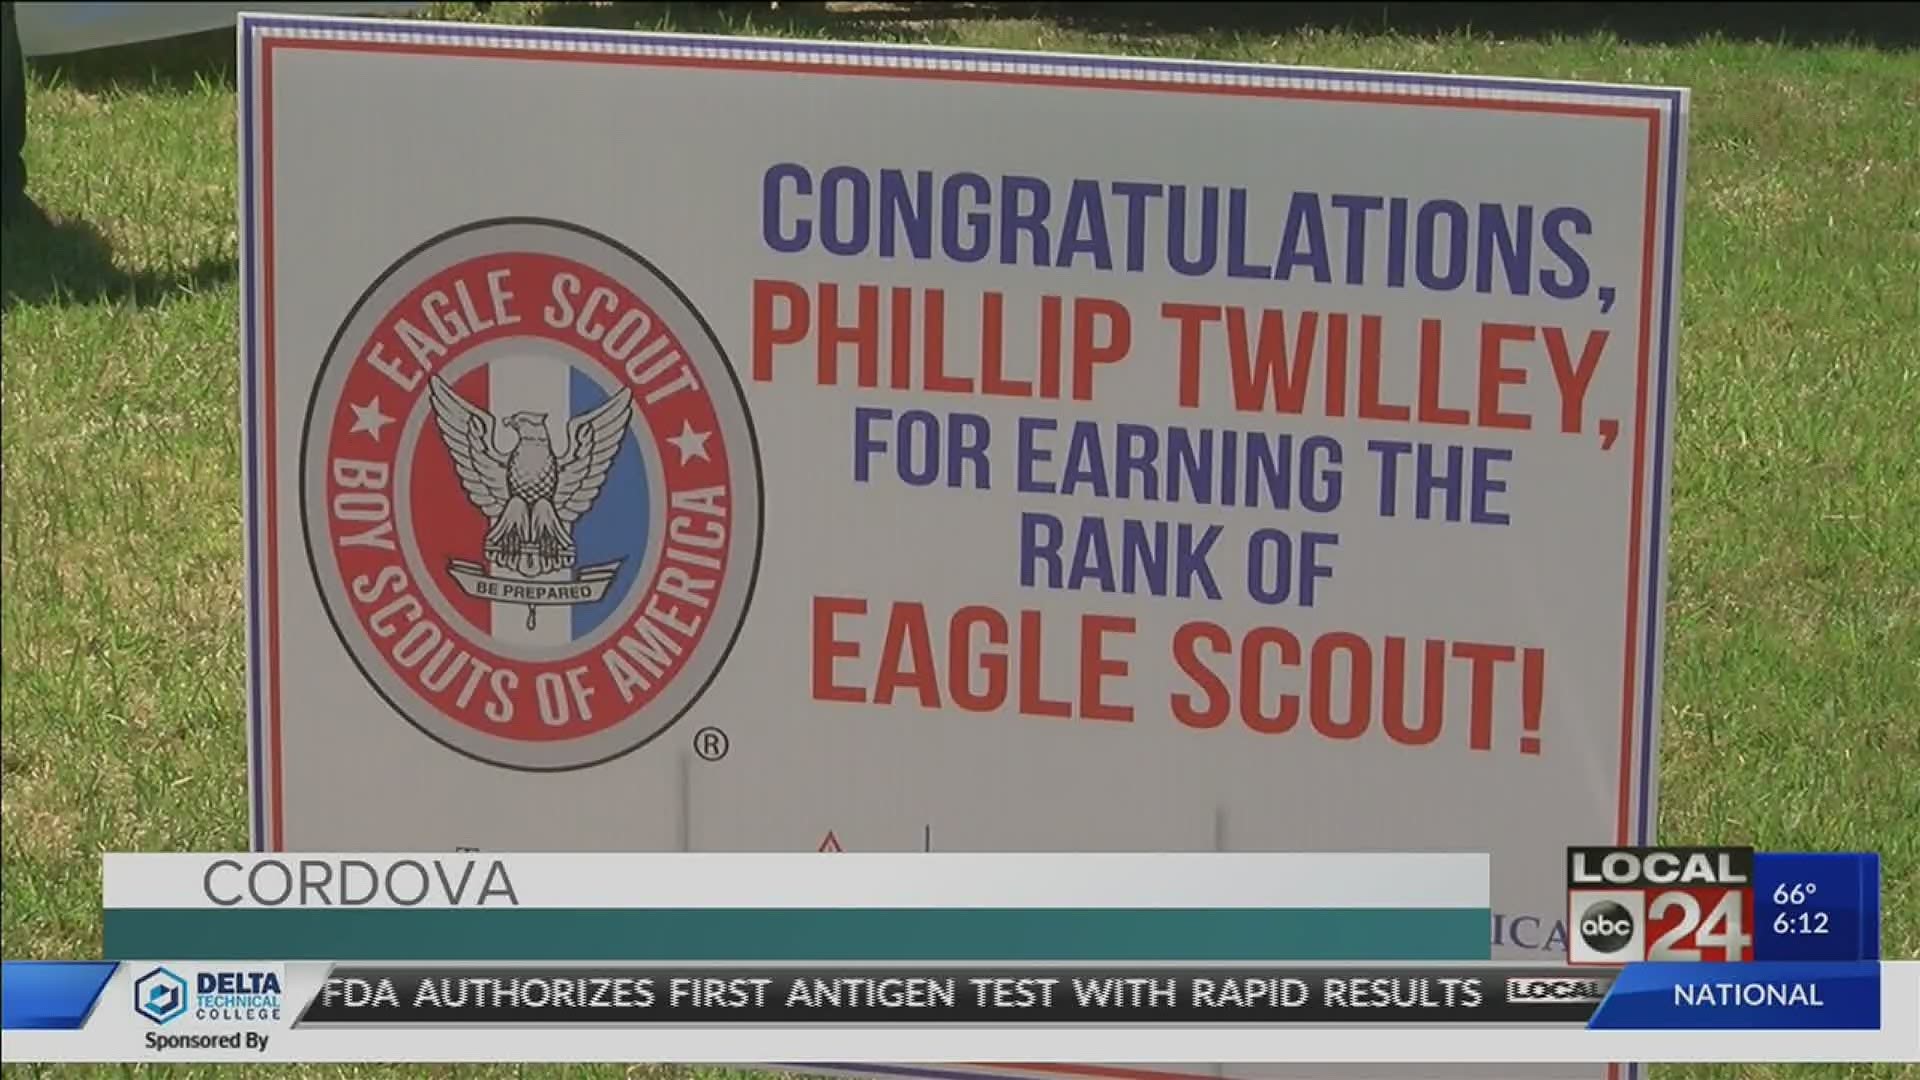 Eagle scout Phillip Twilley was honored by his Troop 457 with the Eagle award in an outdoor ceremony